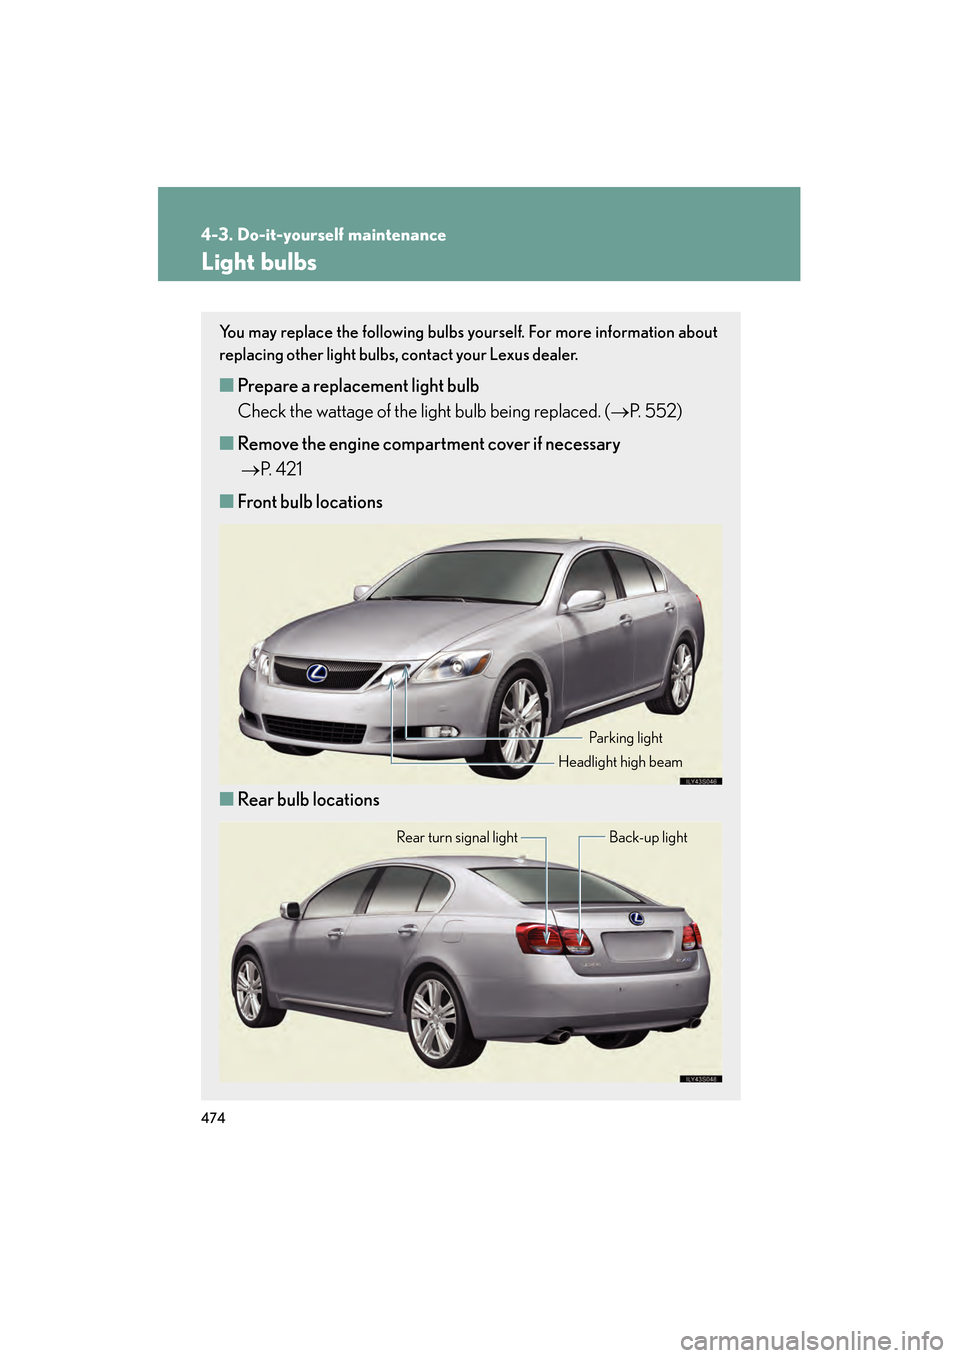 Lexus GS450h 2008  Owners Manual 474
4-3. Do-it-yourself maintenance
GS_HV_U
June 19, 2008 1:15 pm
Light bulbs
You may replace the following bulbs yourself. For more information about
replacing other light bulbs, contact your Lexus d